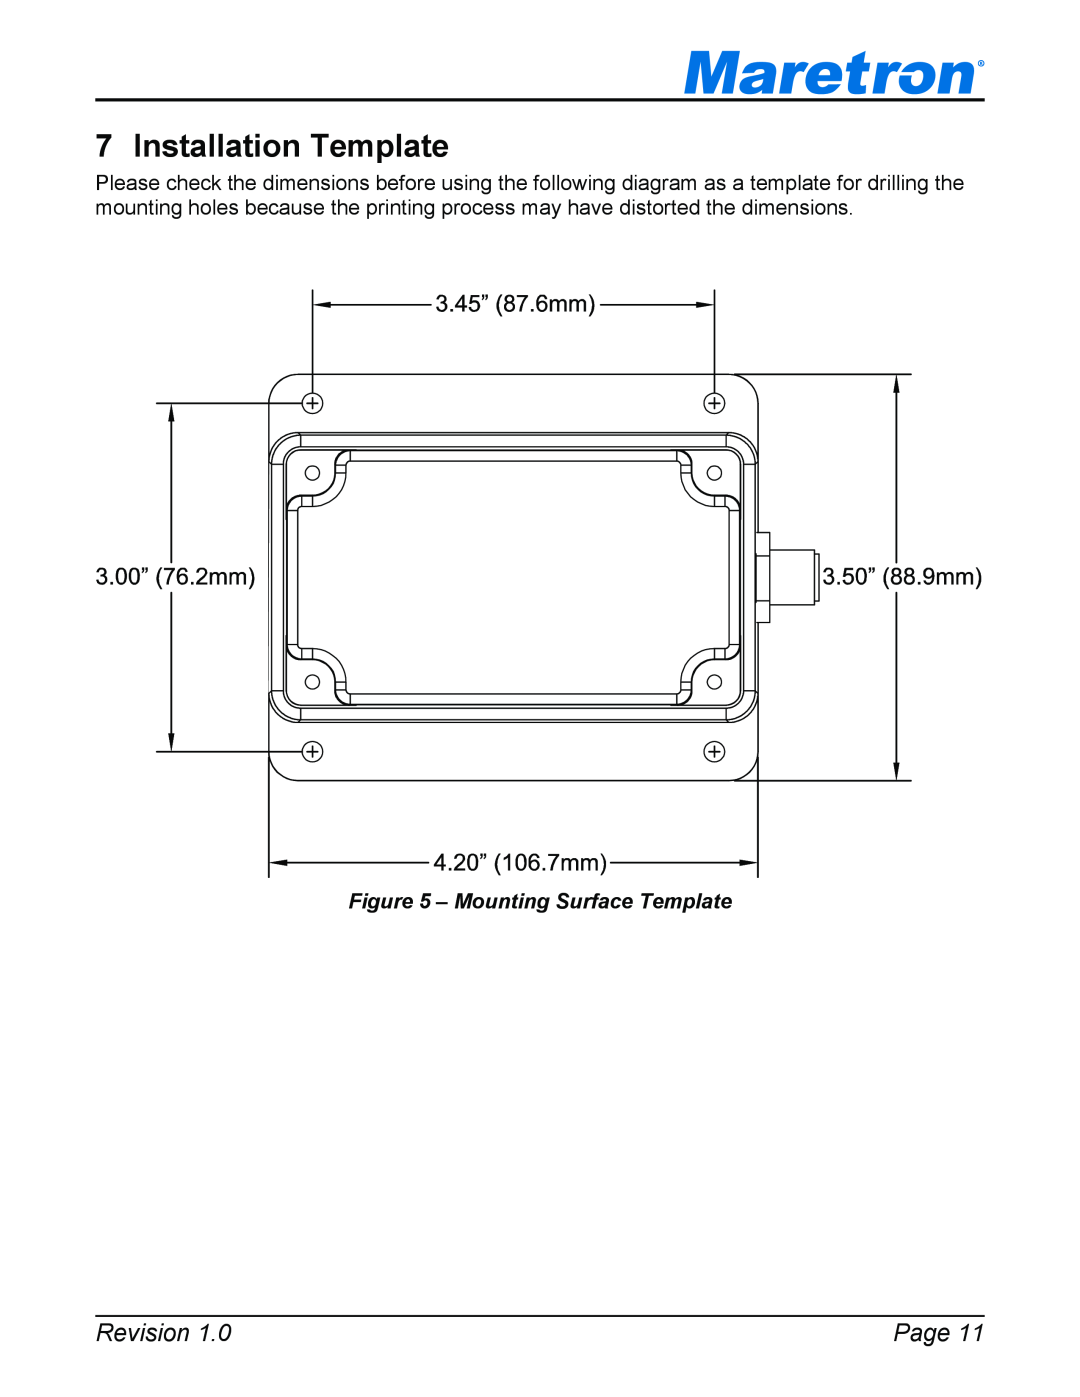 Maretron TP-EGT-1 user manual Installation Template, Revision, Page, Mounting Surface Template 